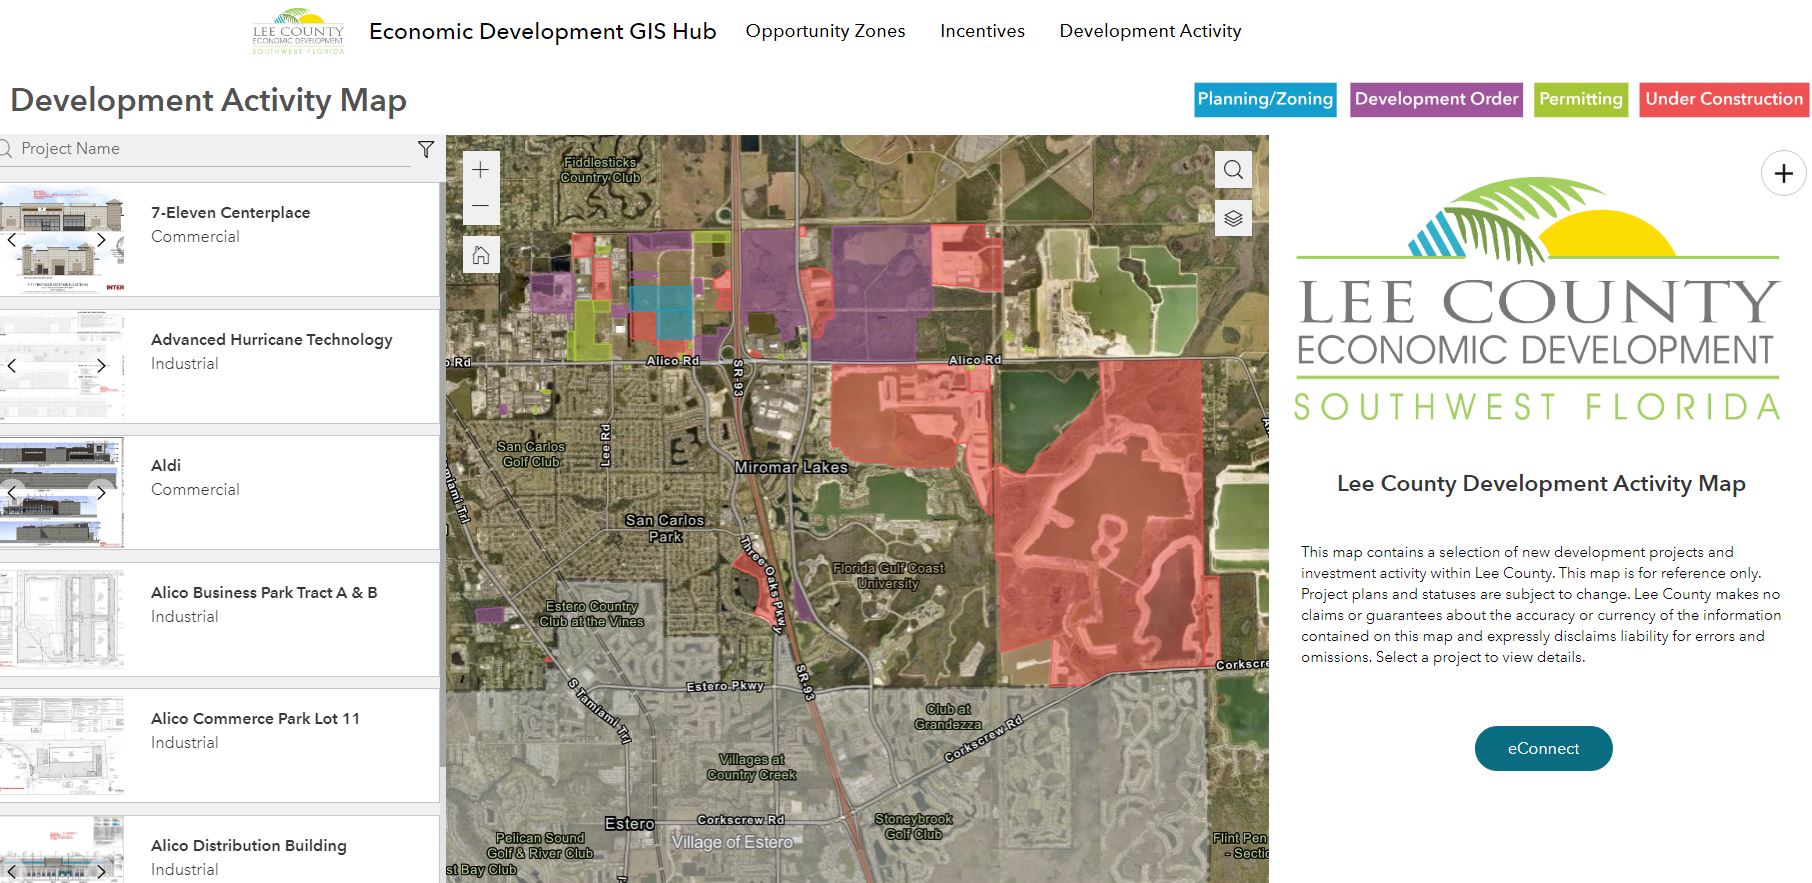 Development Activity Map from Lee County details New Construction